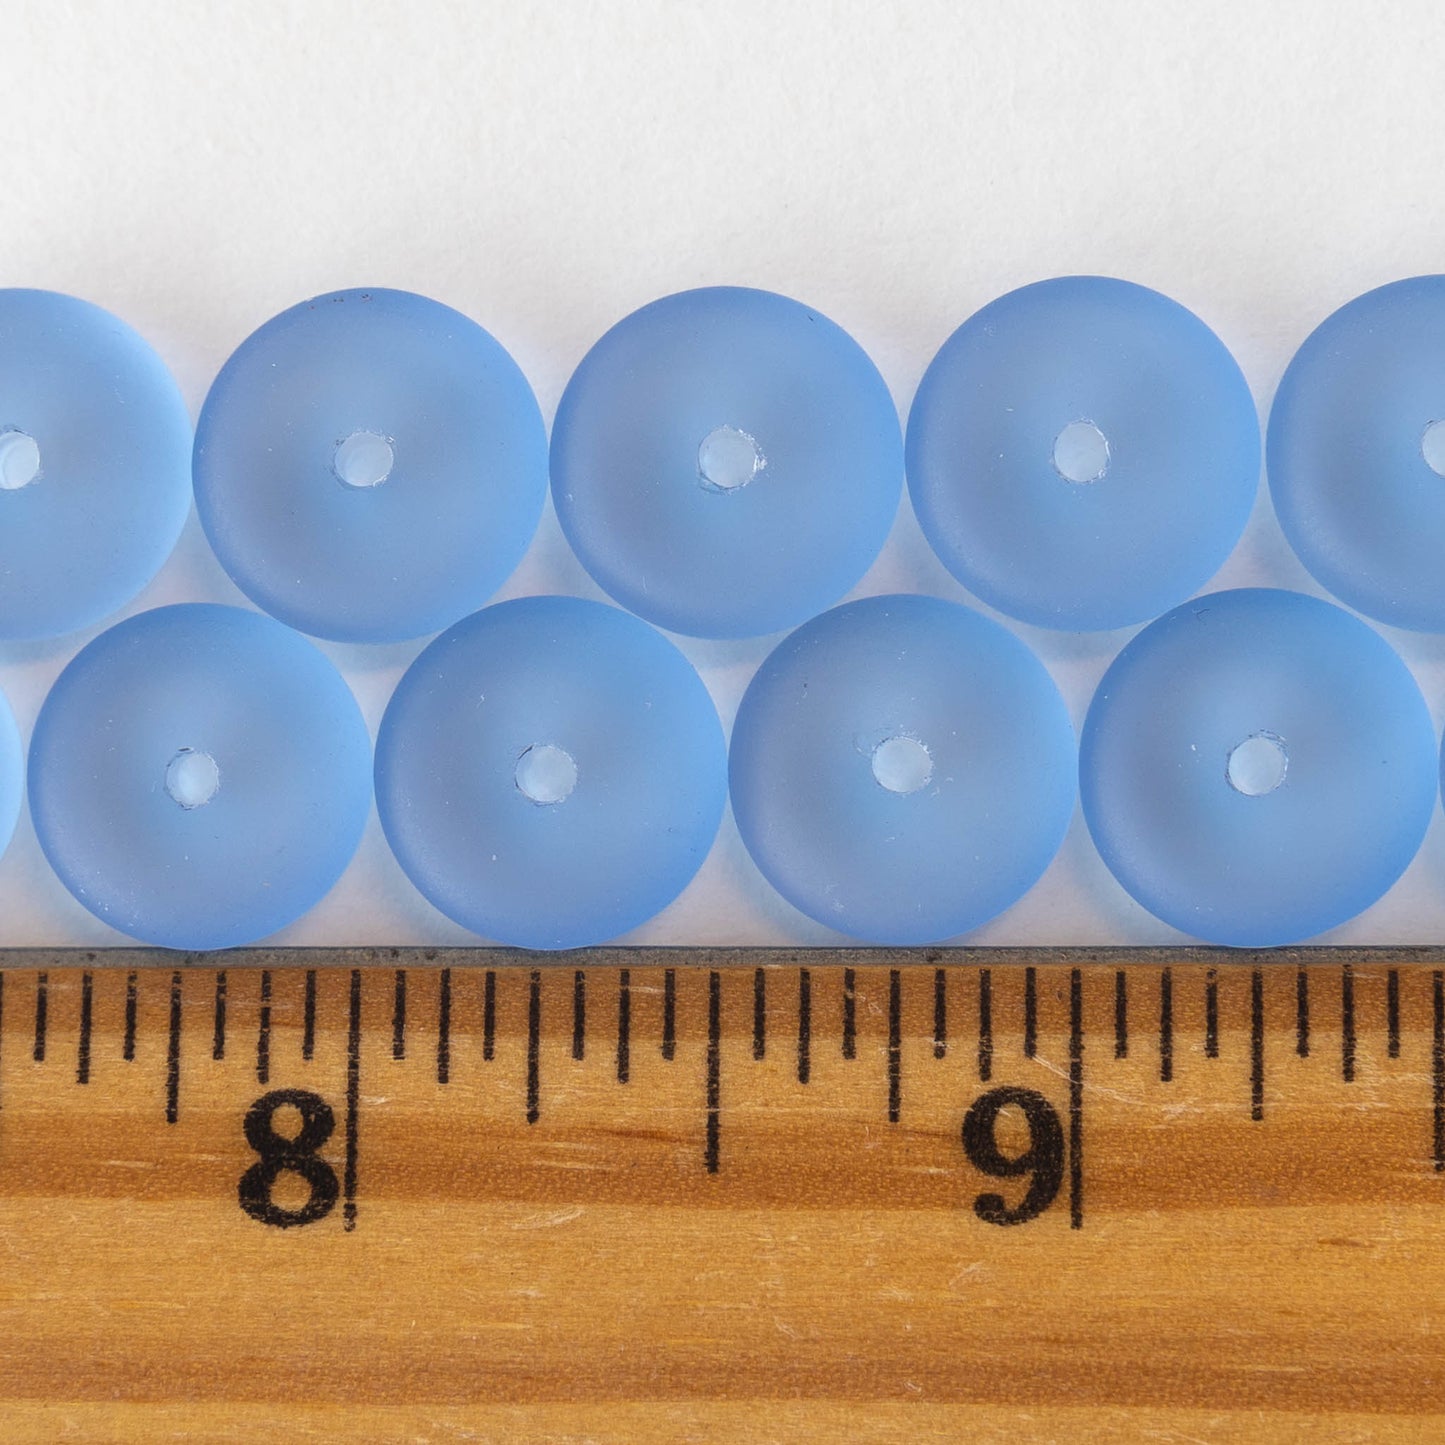 5x12mm Frosted Rondelle - Sapphire Blue - 28 Beads